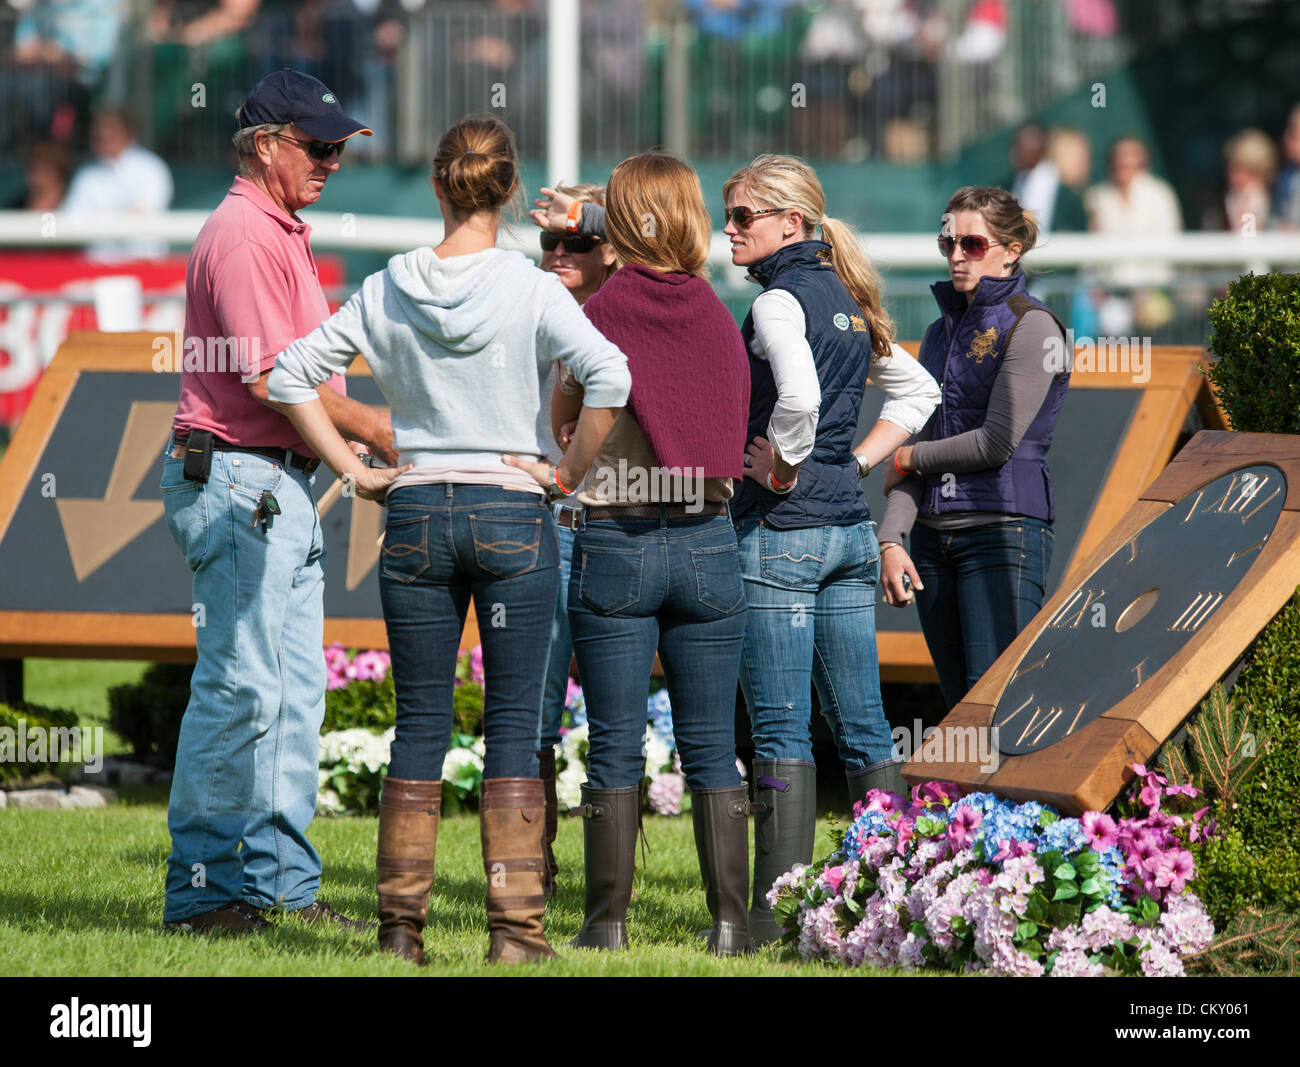 Burghley House, Stamford, UK - Mark Phillips and girlfriend Lauren Hough walk the cross country course at Burghley Horse Trials with other US riders, 31st August 2012. Stock Photo